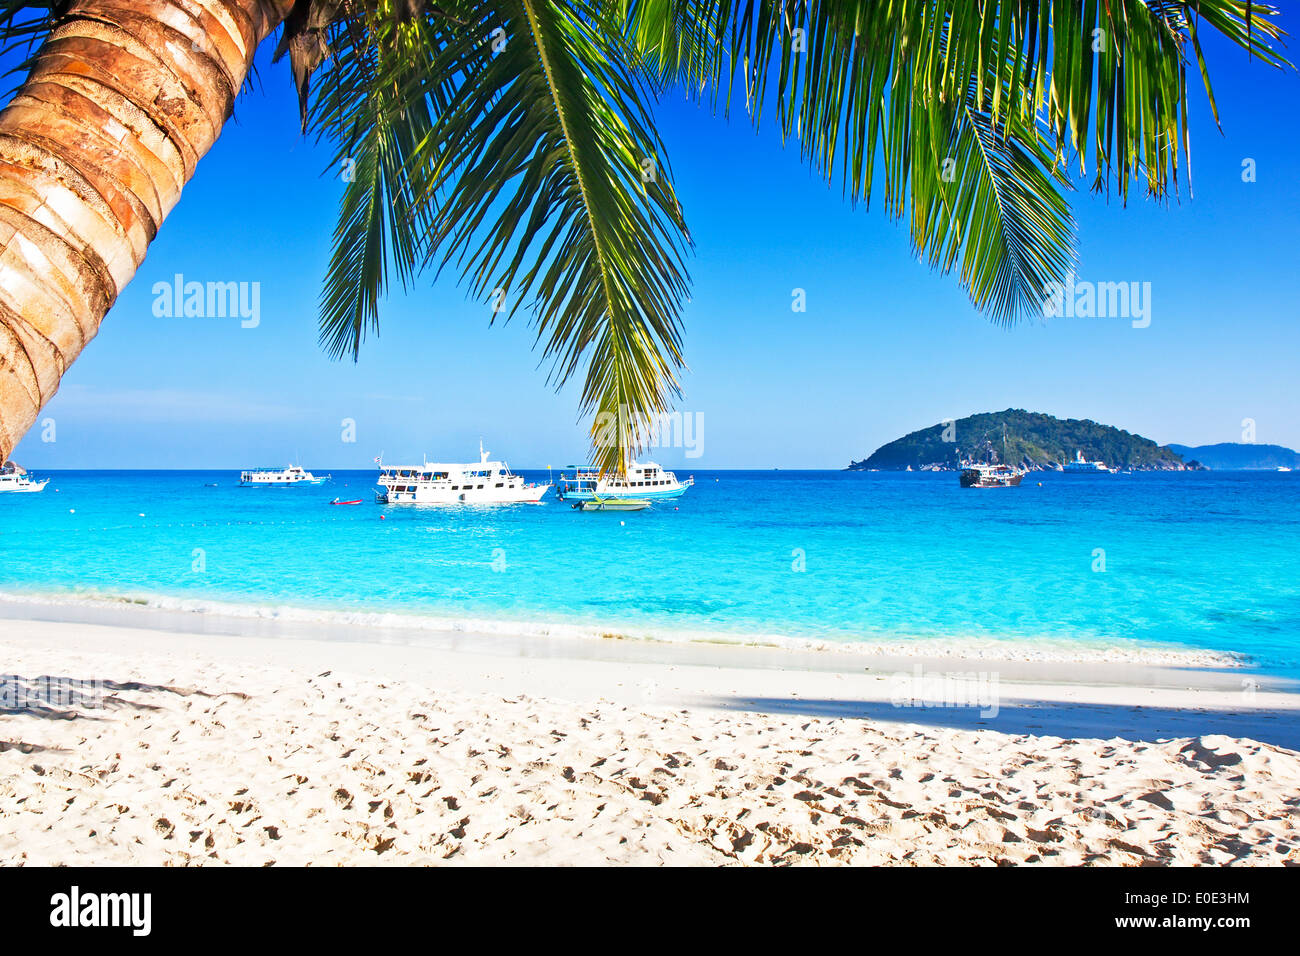 Tropical white sand beach with palm trees Stock Photo